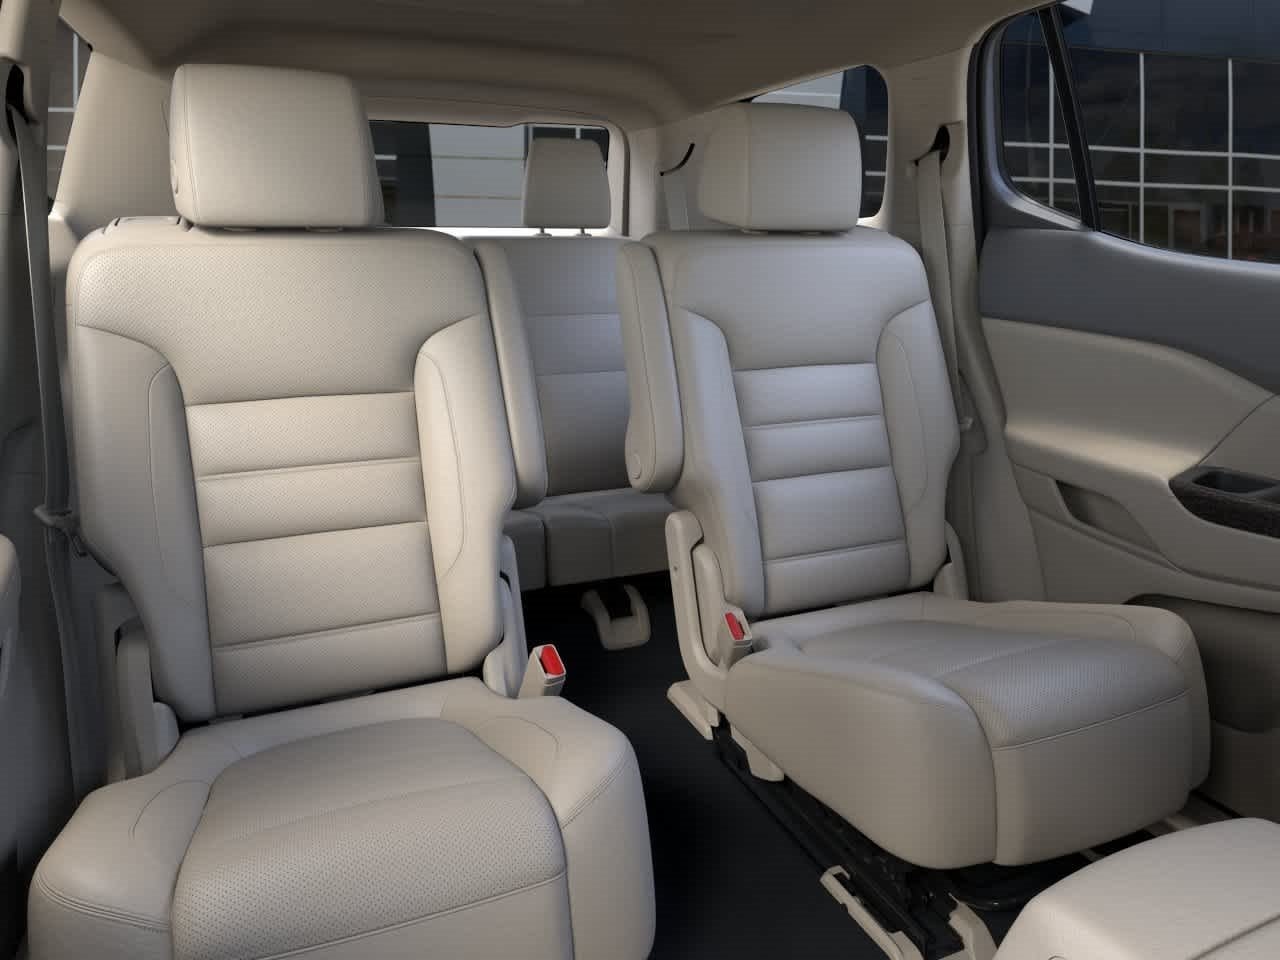 Holden Acadia Interior Images & Photos - See the Inside of the Latest  Holden Acadia | CarsGuide